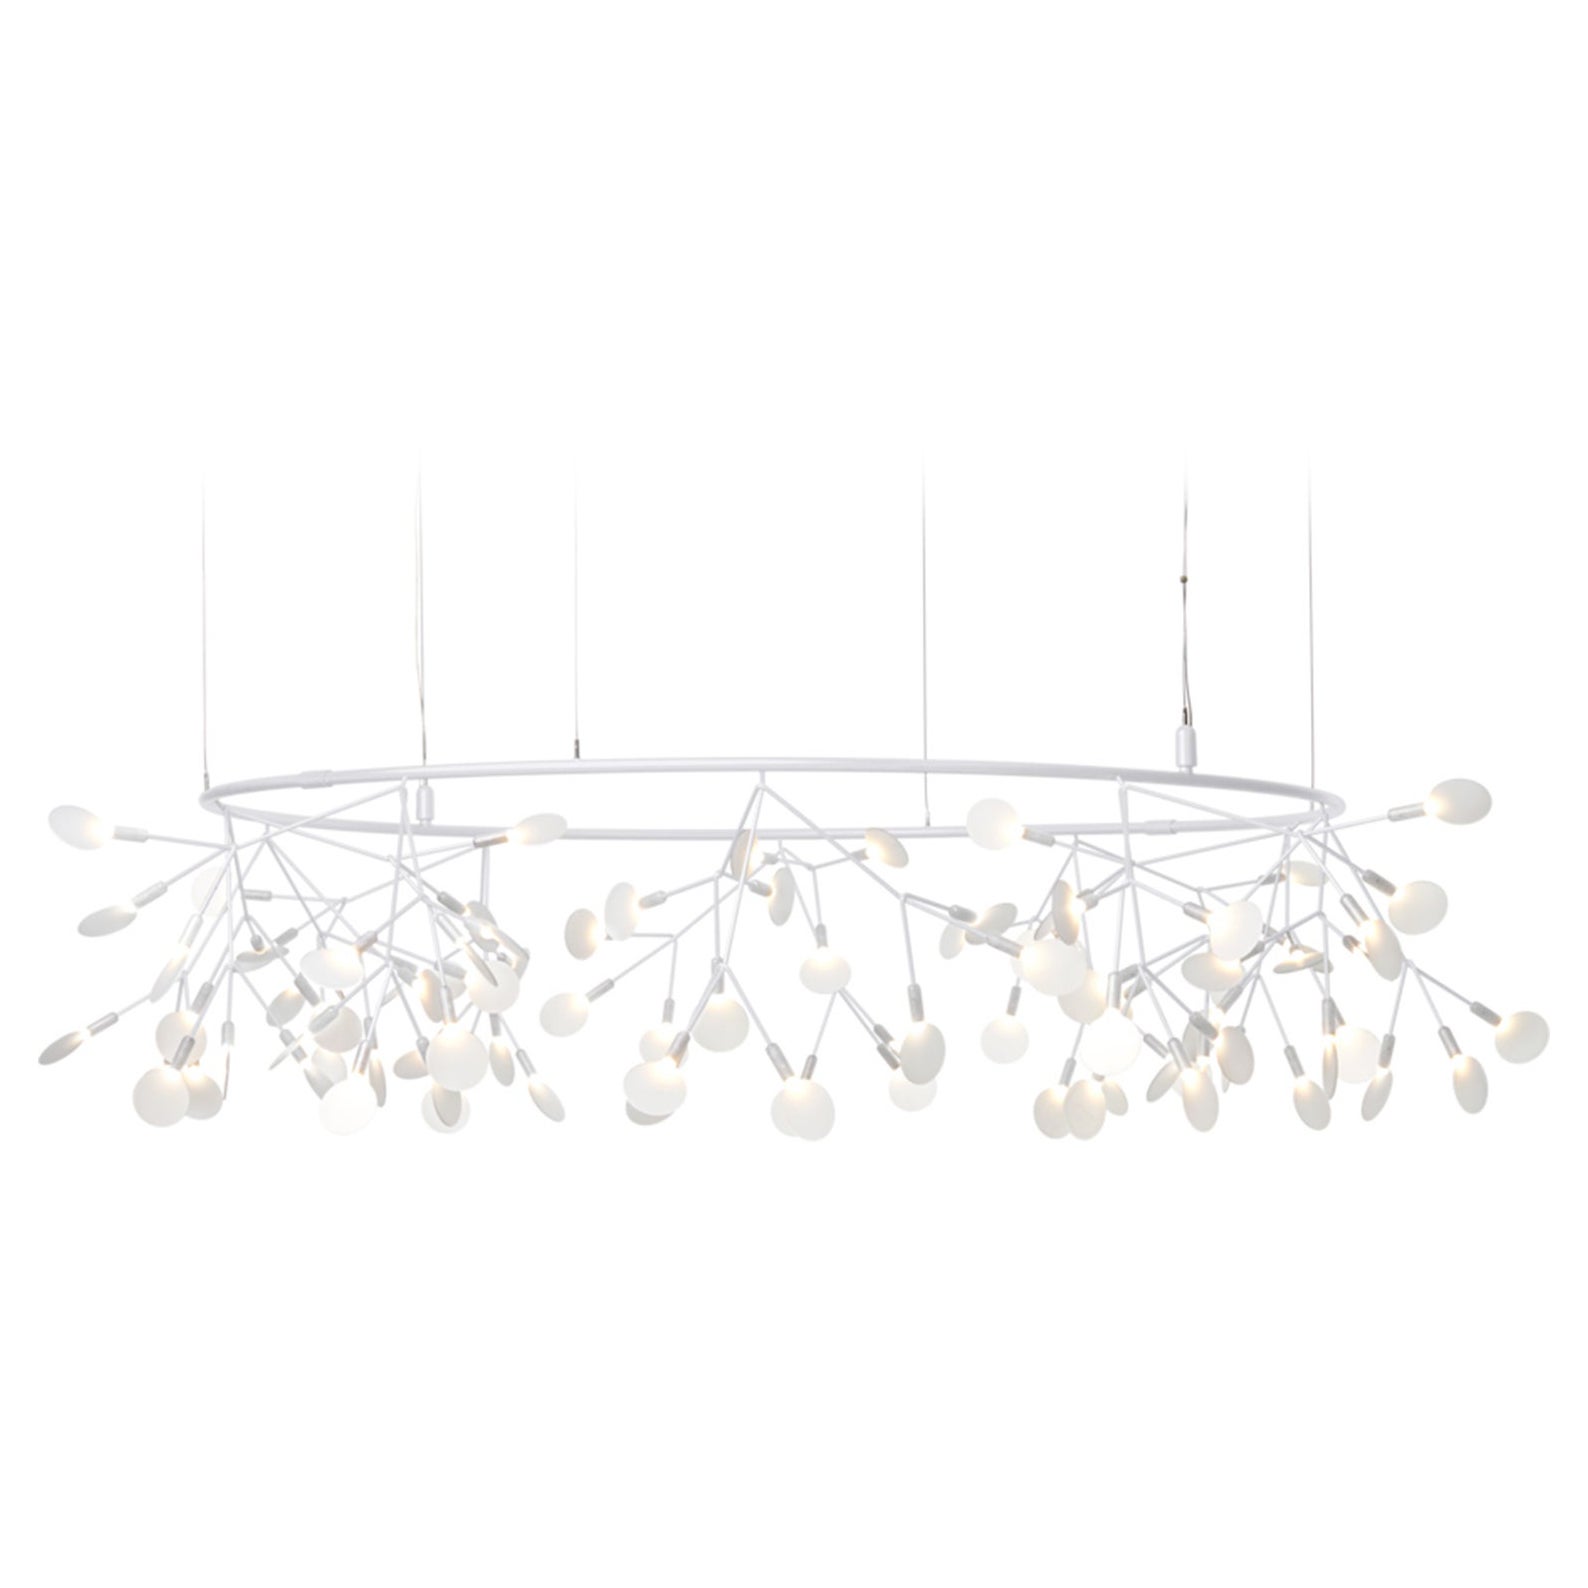 Moooi Heracleum The Big O Small Suspension Lamp in White by Bertjan Pot